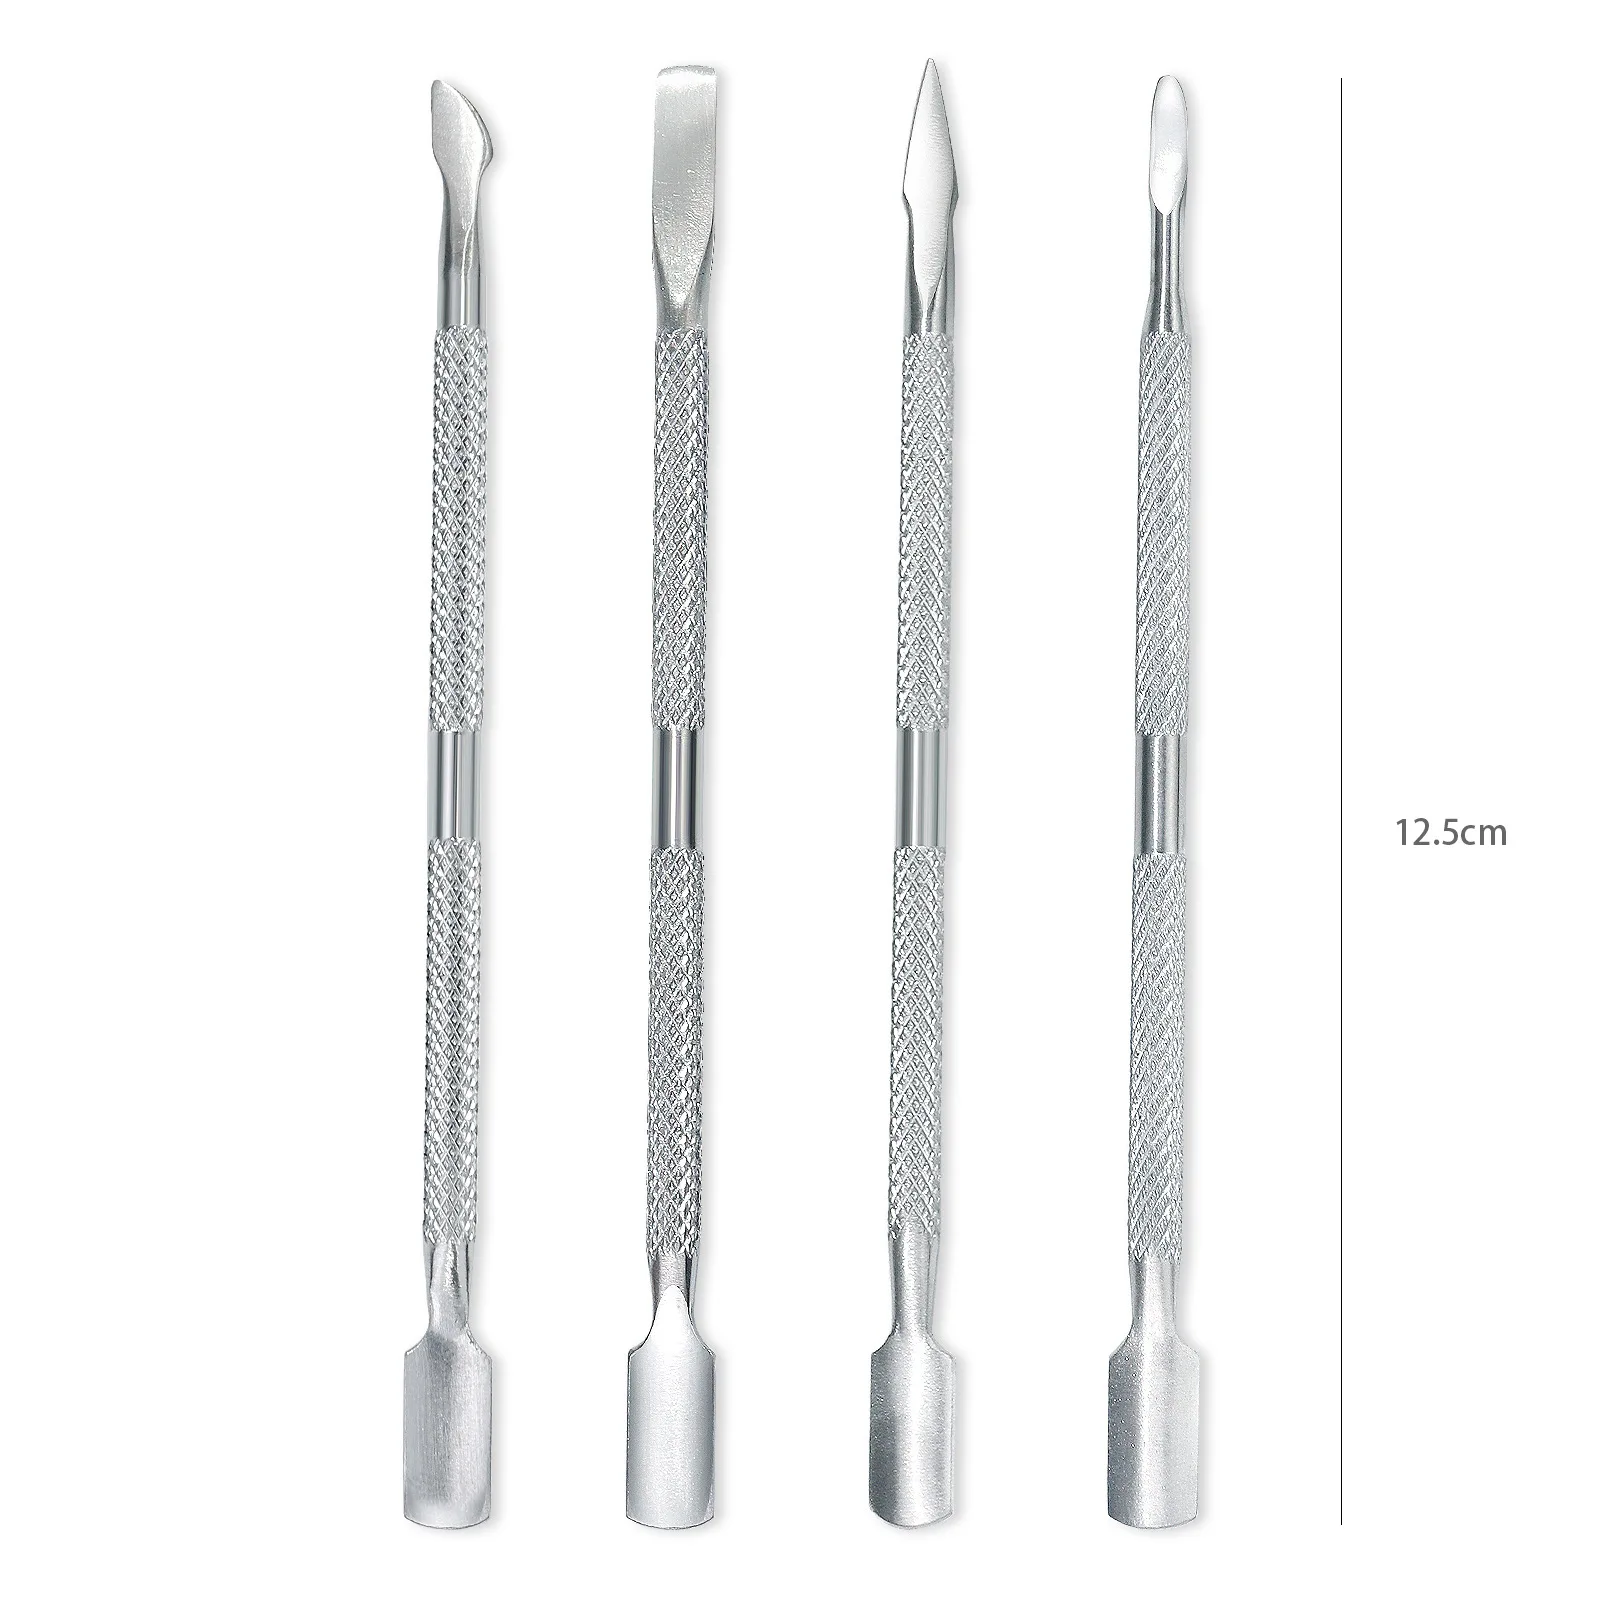 Saf86c191316c4b74847e112cb21e69d80 1Pcs Stainless Steel Double Head Cuticle Pusher for Manicure 2023 Tools for Nails Art Non-Slip Nail Cuticle Remover Accessories